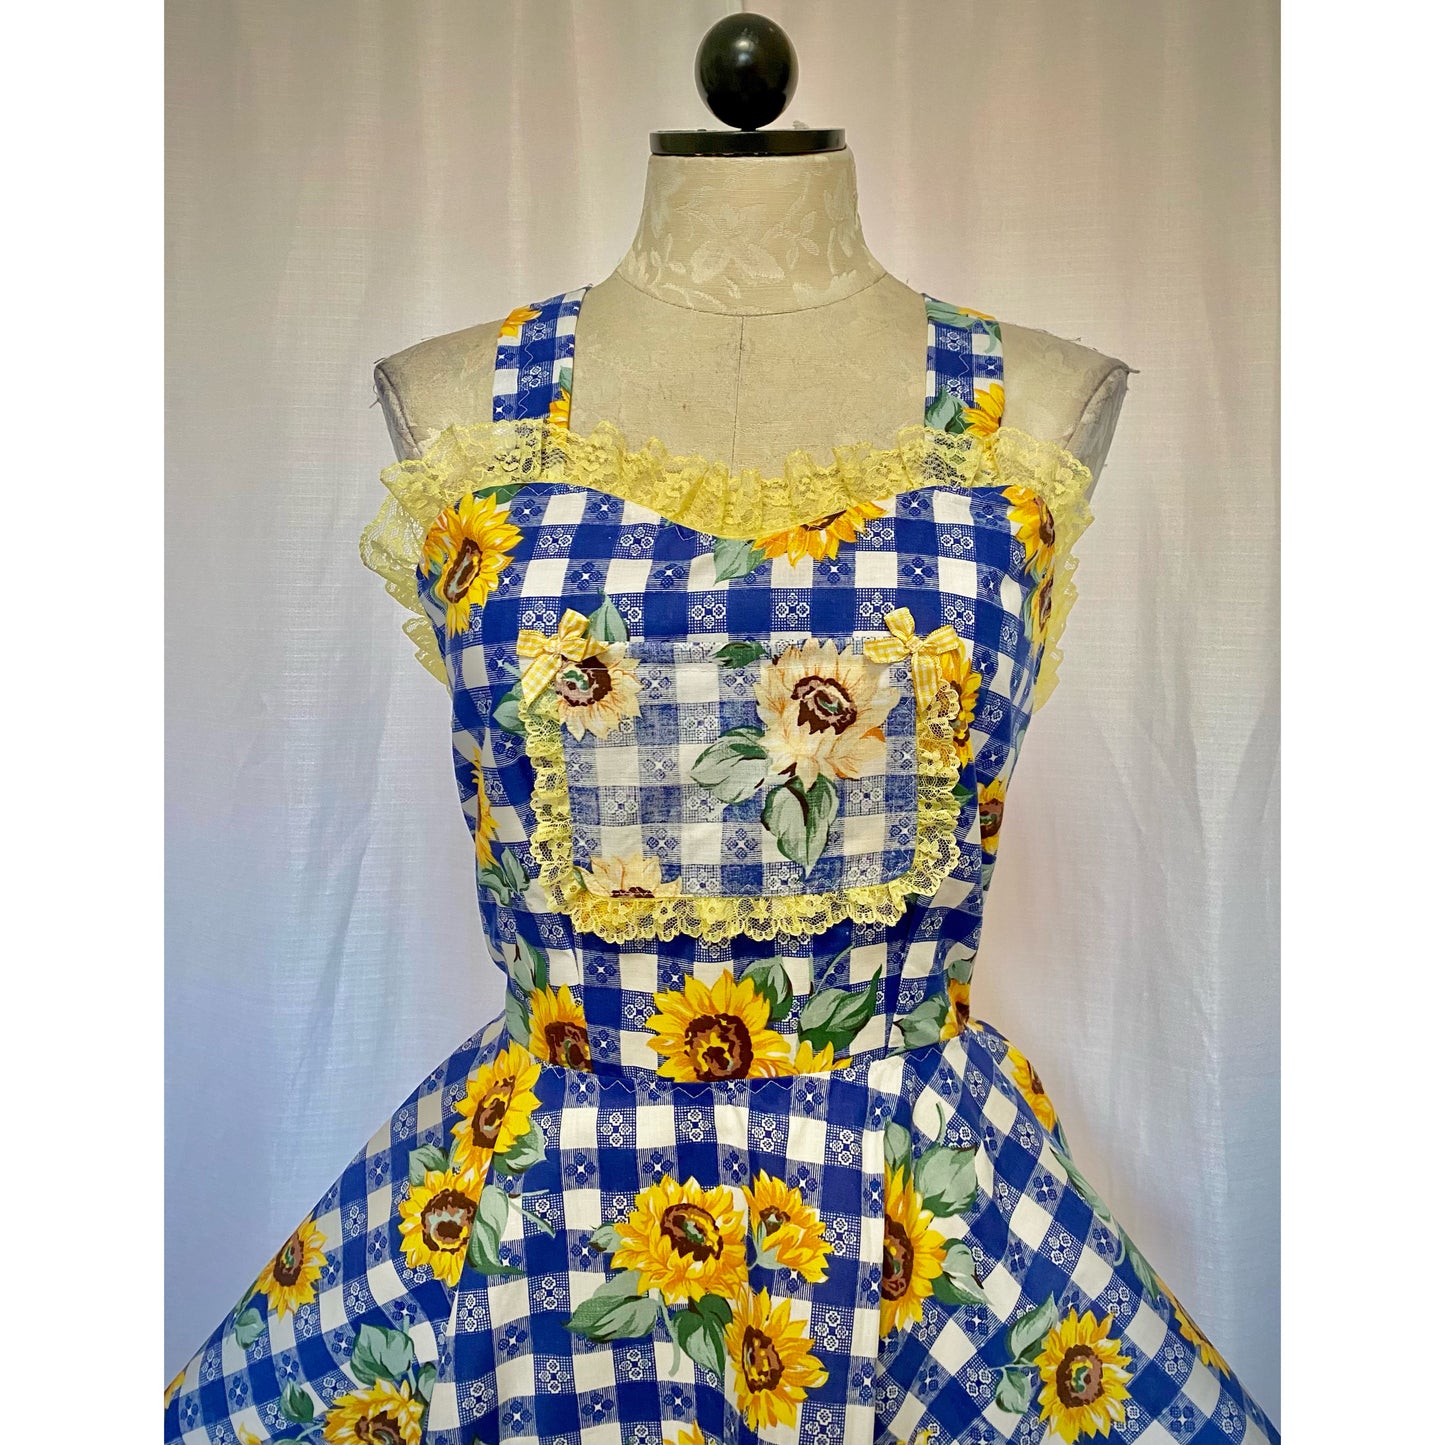 The Apron Dress in Blue Sunflower